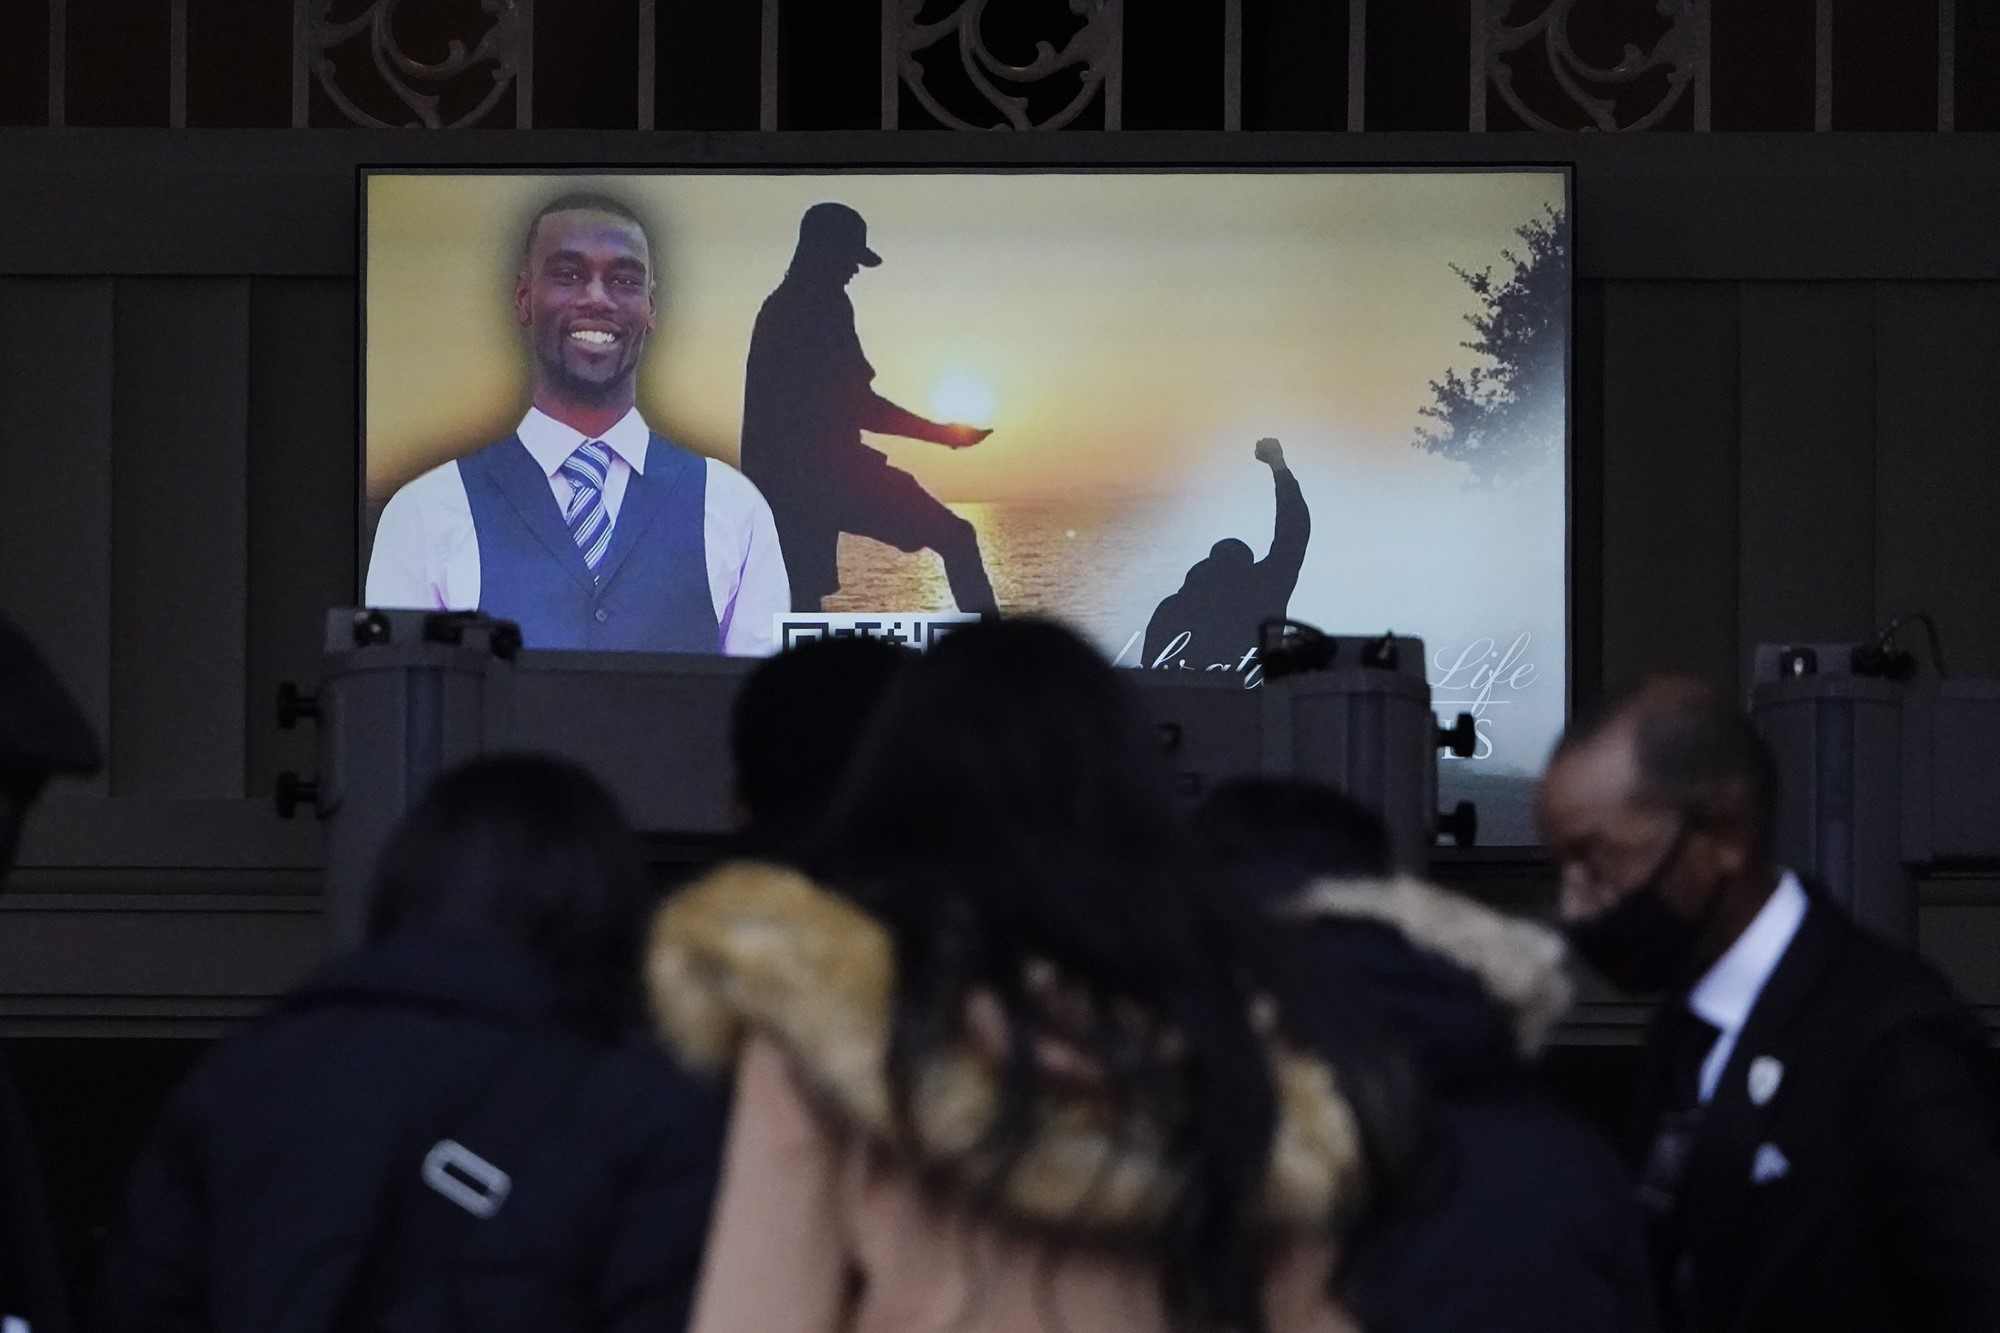 People file into a hall with a screen showing photos of a black man.